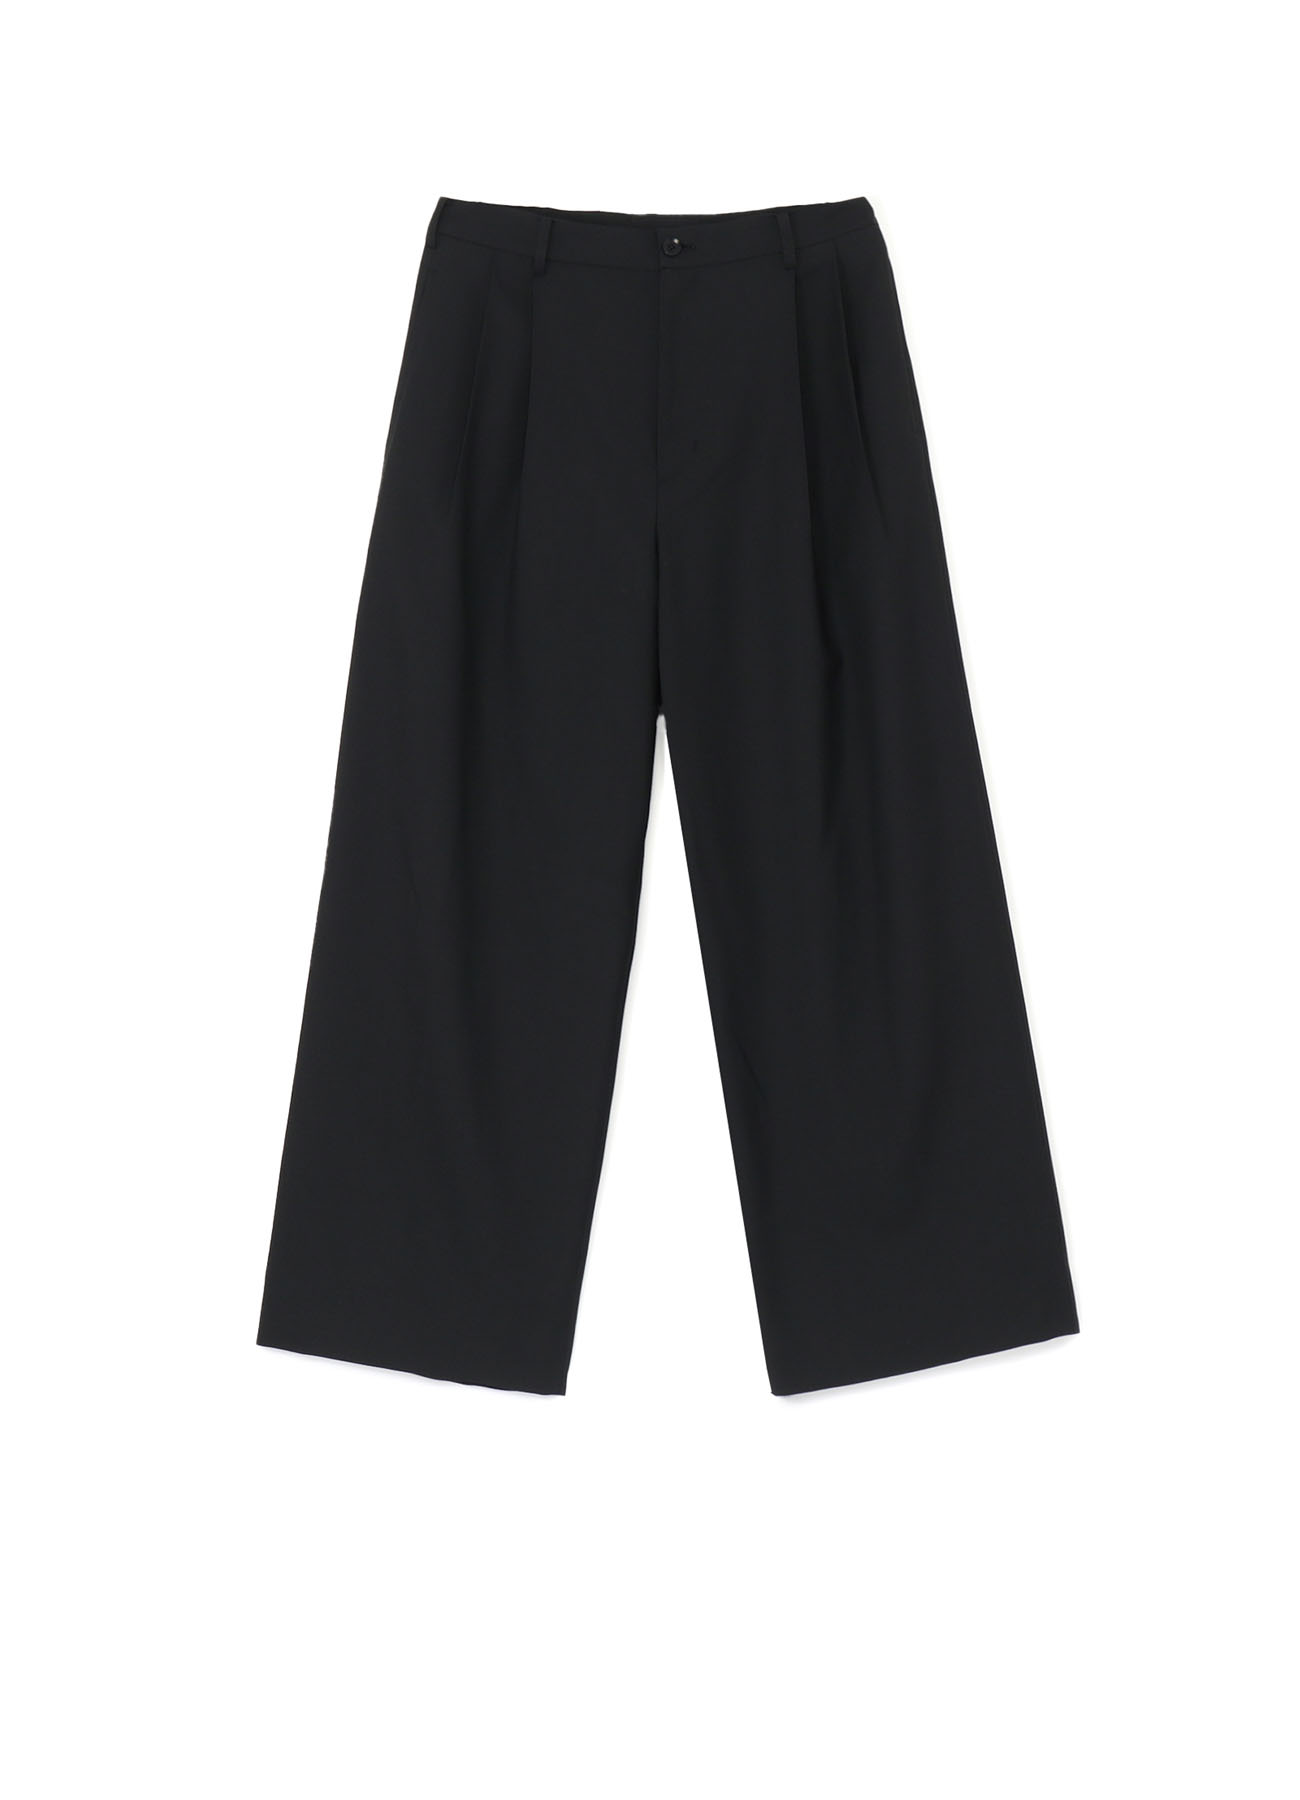 WOOL/POLYESTER GABARDINE DOUBLE PLEATED WIDE PANTS